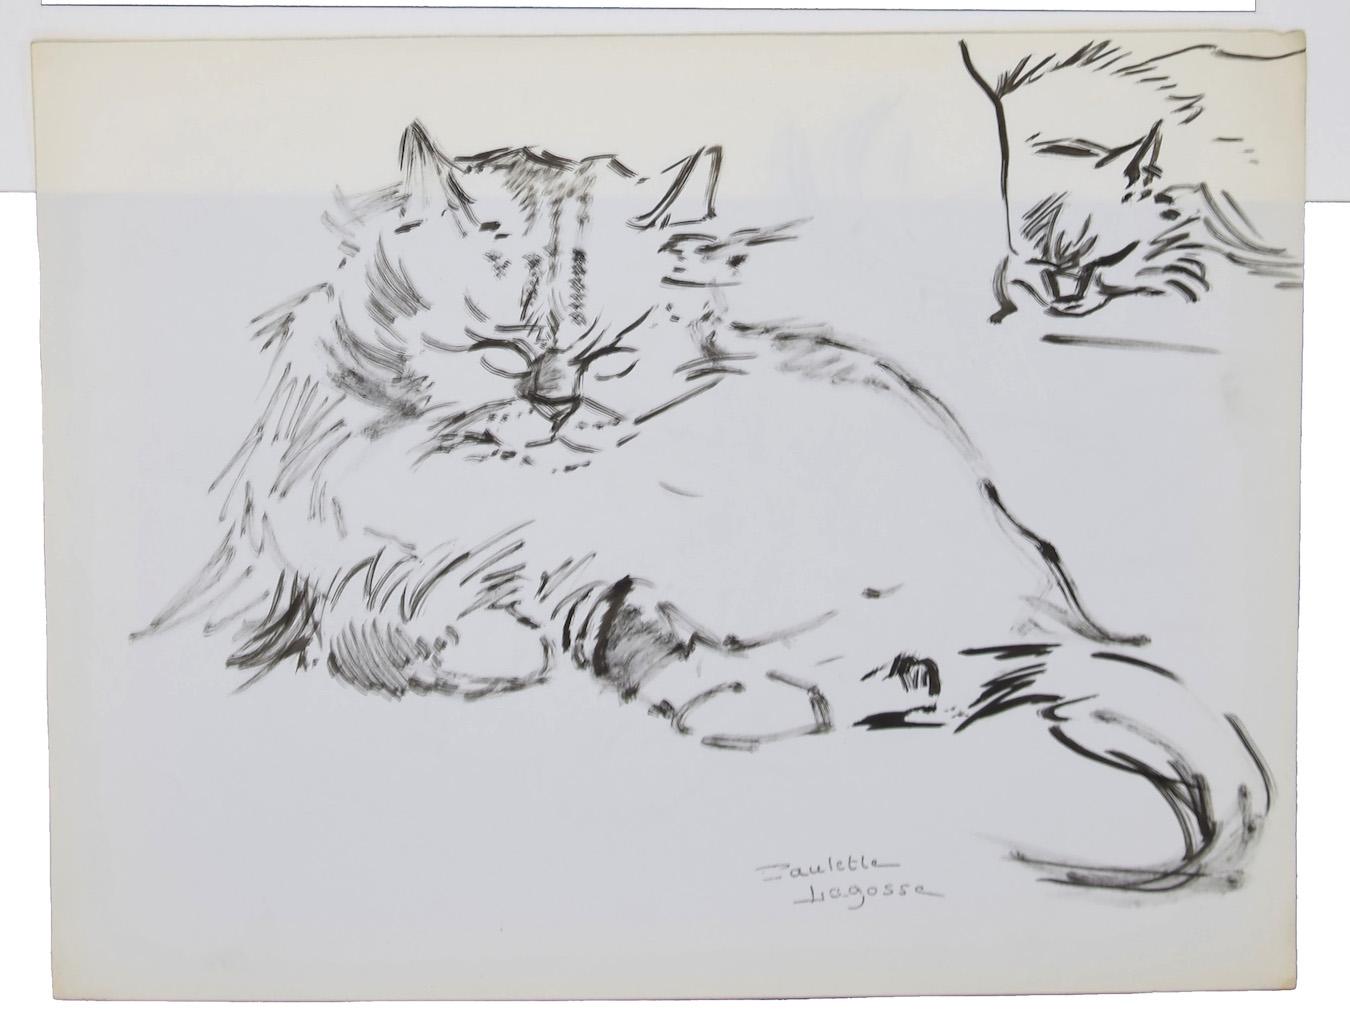 The Cats - Pen on Paper by Marie Paulette Lagosse - 1970s